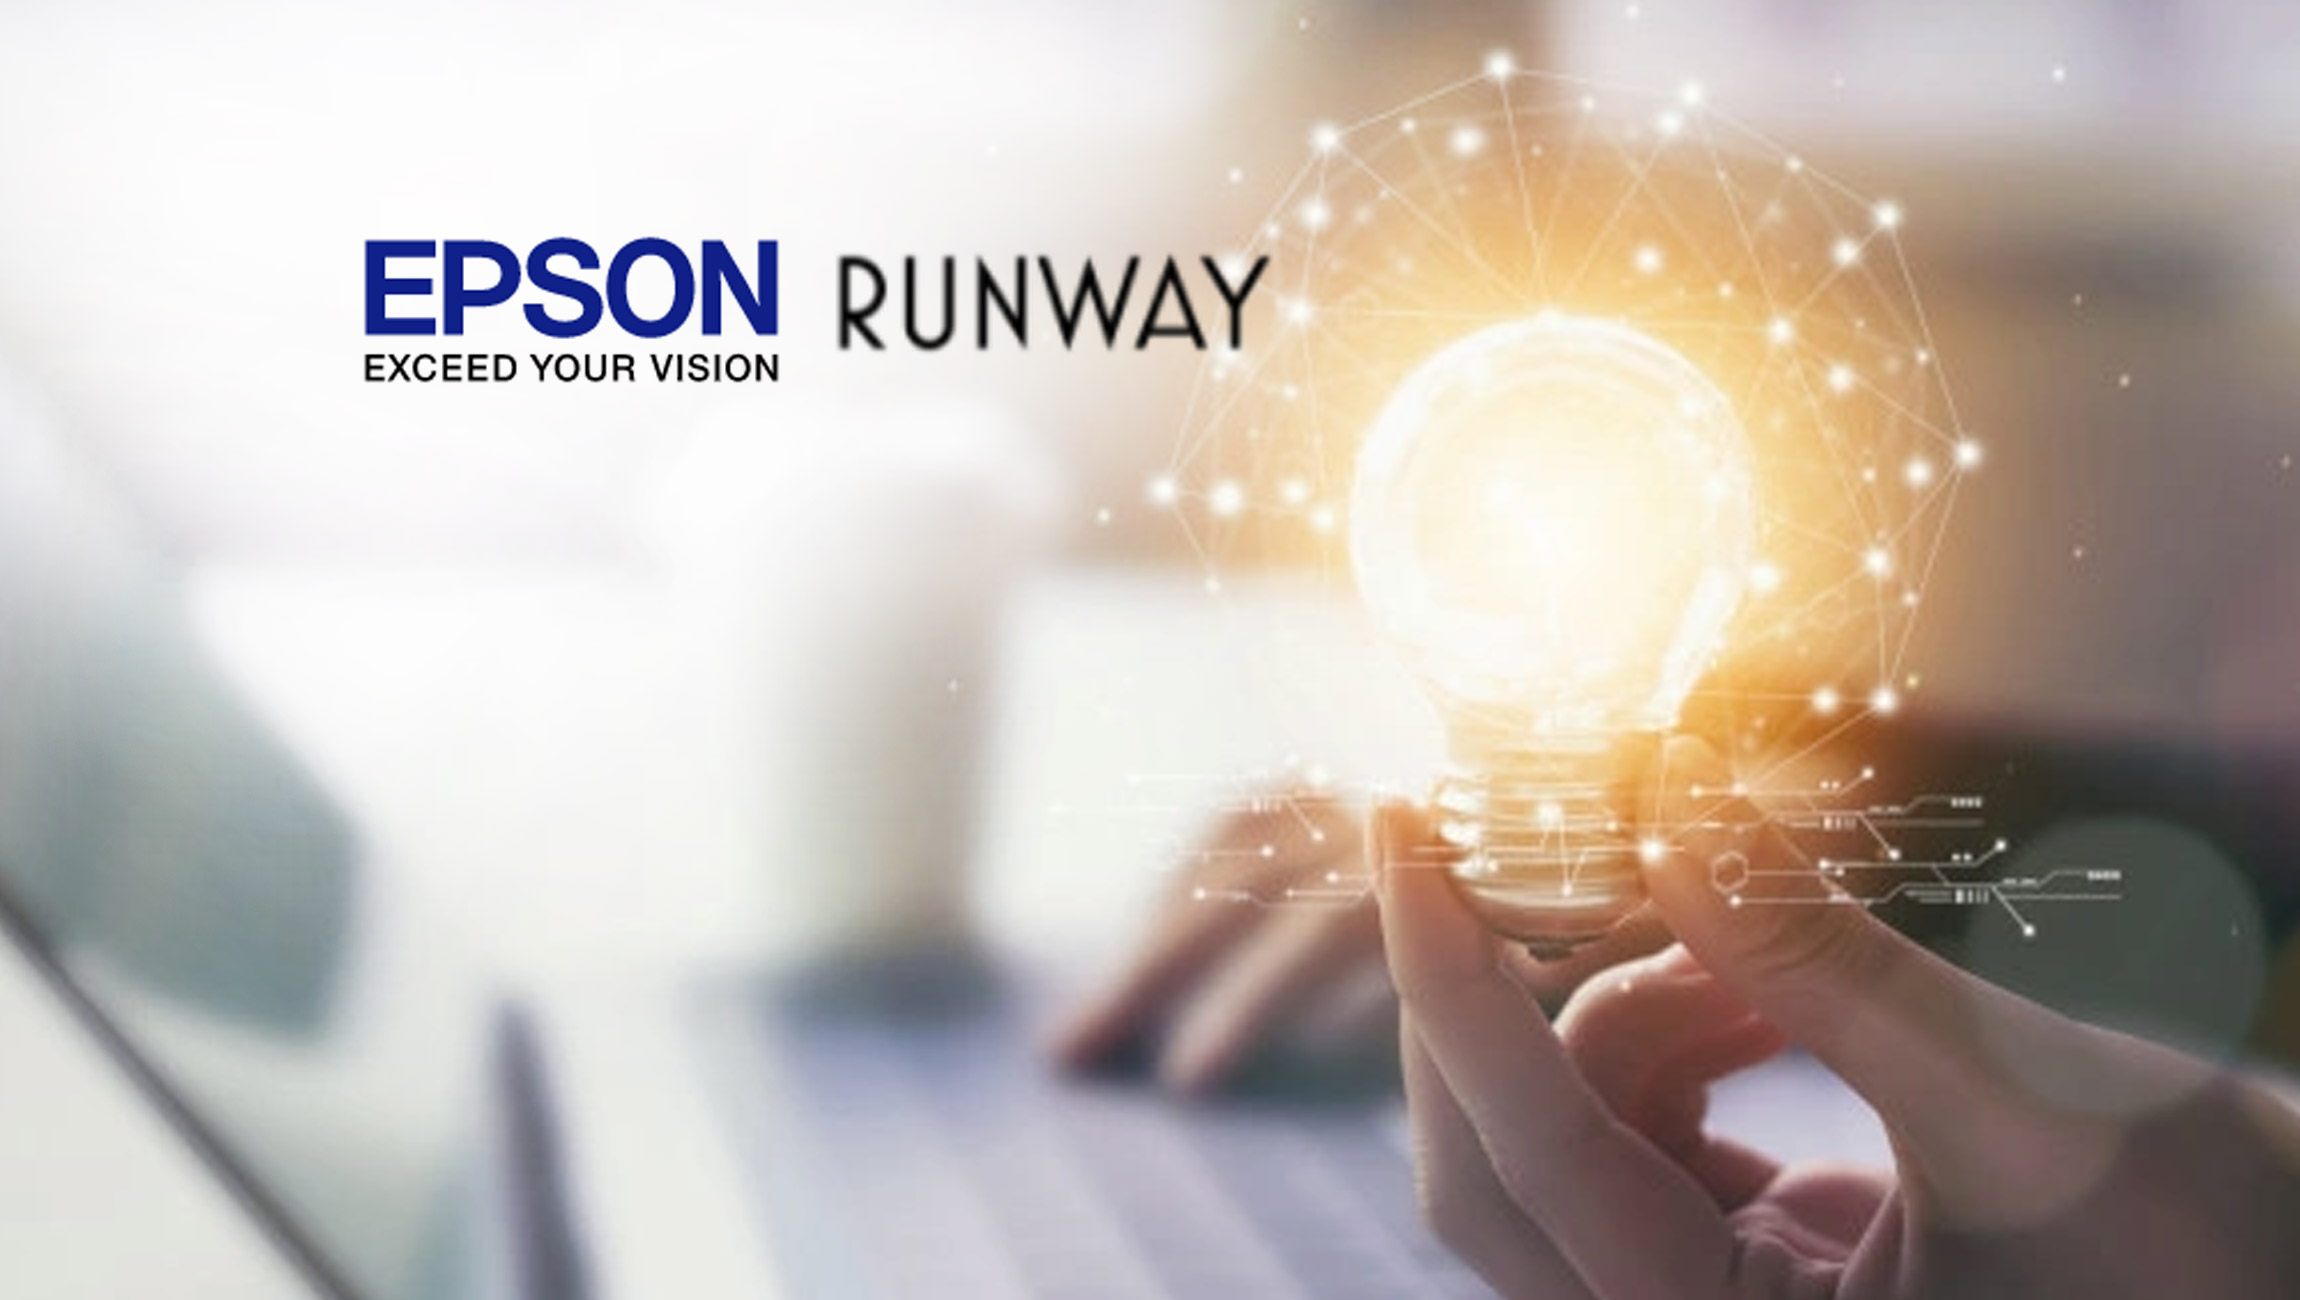 Epson-Partners-with-Runway-to-Drive-Digital-Transformation-_-Build-an-Innovation-Ecosystem